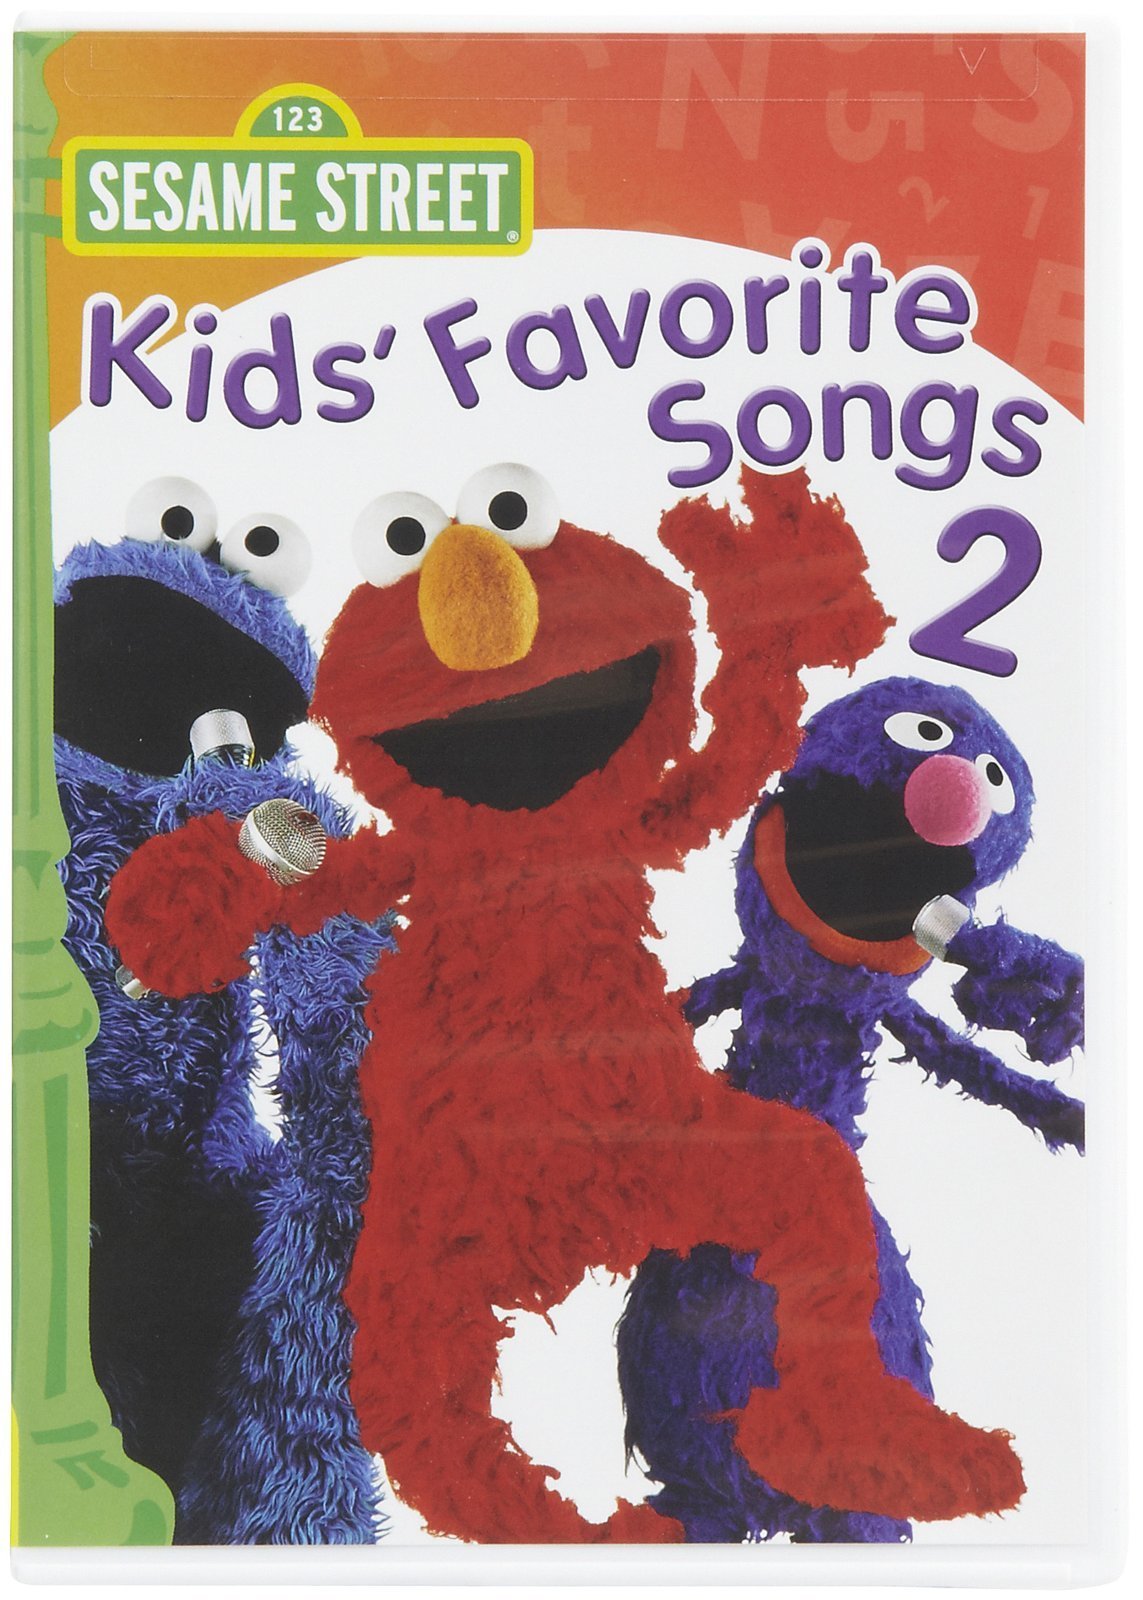 Join Elmo and his Sesame Street pals in the second volume of Kids' Fav...